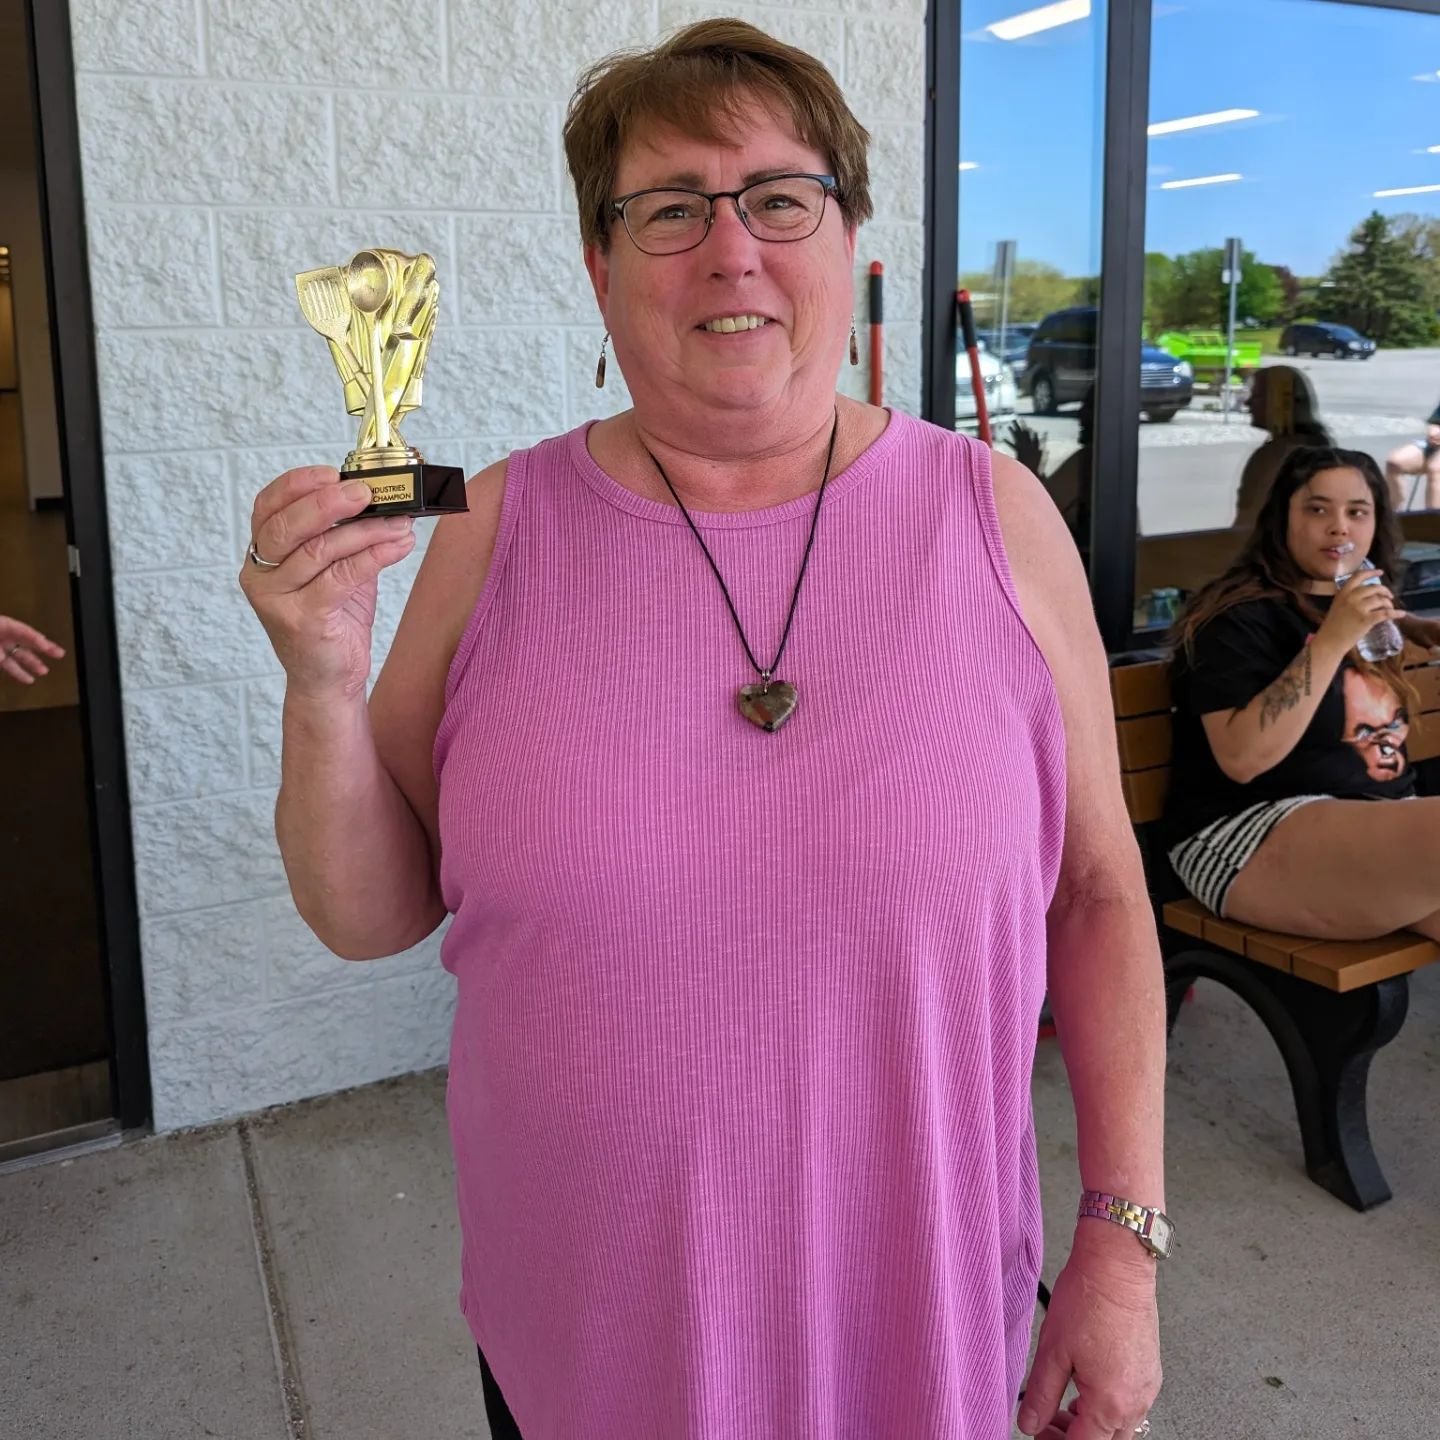 Congratulations to Terri and Codie for taking home the trophies at this year's staff BBQ! Terri's coleslaw was second to none and Codie's smoked pork was succulent!